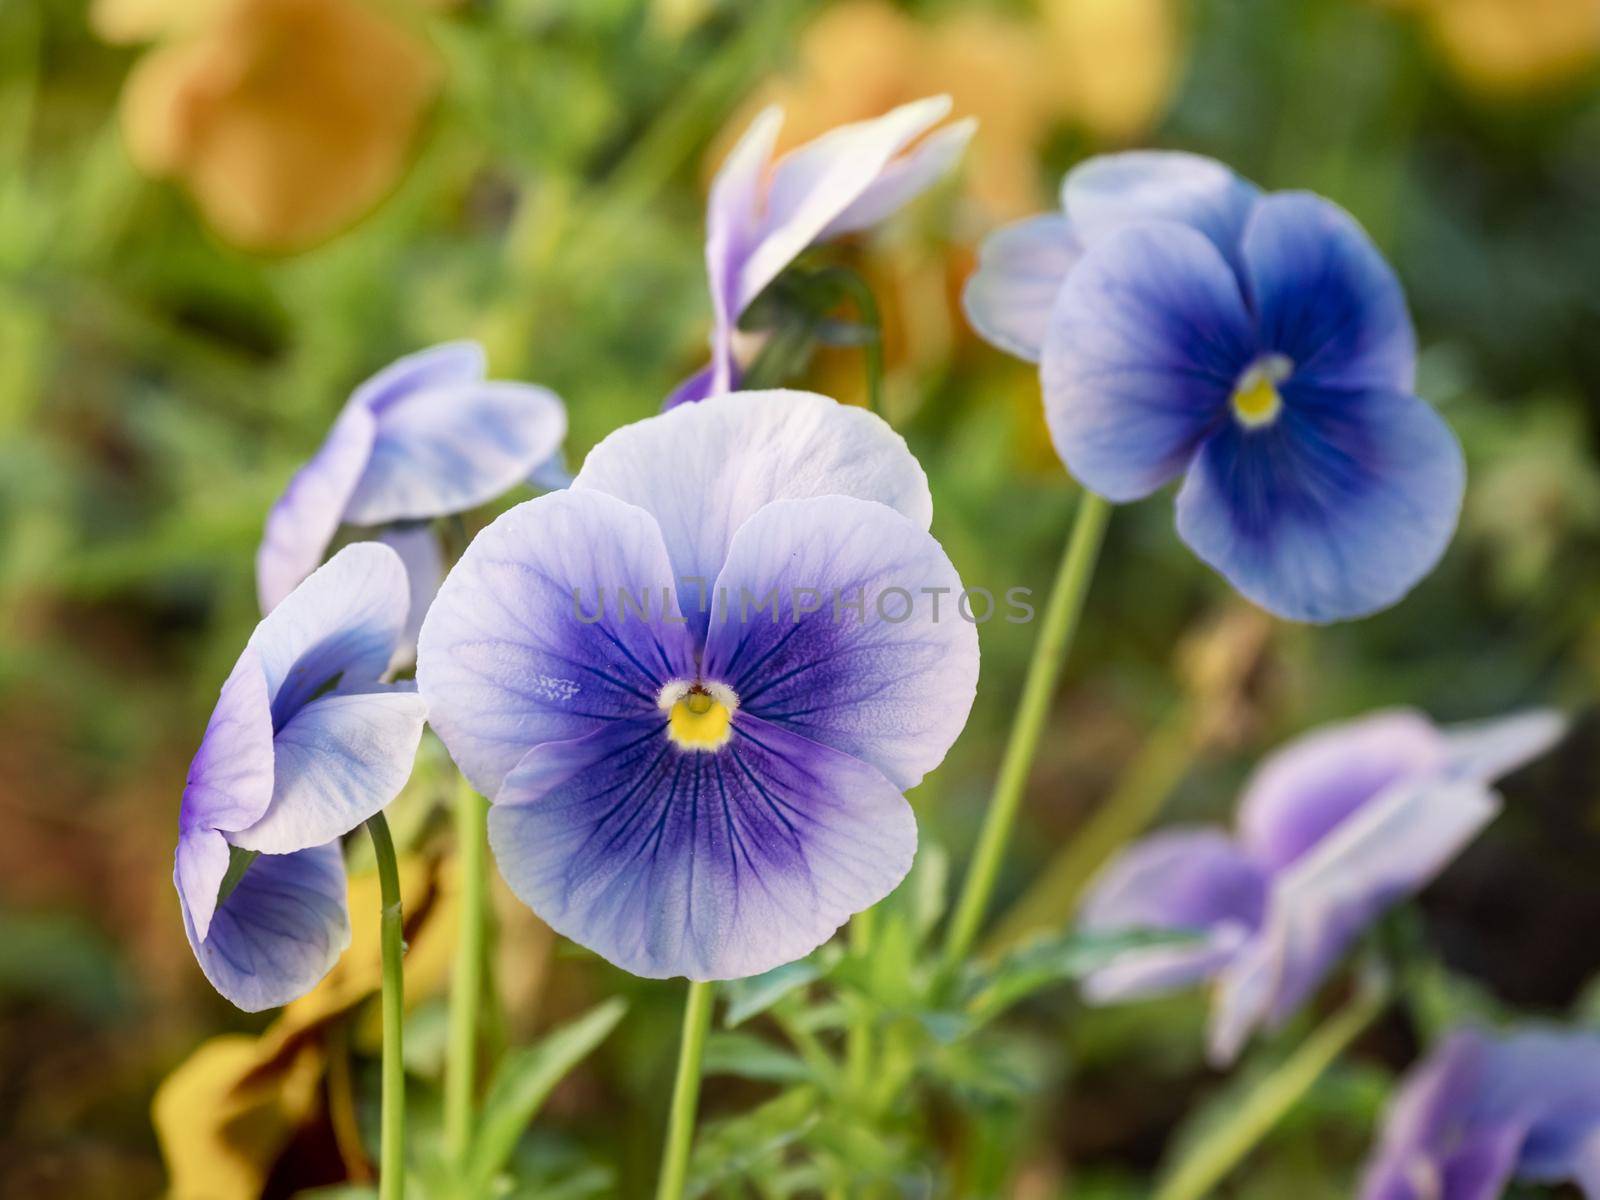 Blooming Viola tricolor, also known as wild pansy, Johnny Jump up, heartsease, heart's delight, tickle-my-fancy, Jack-jump-up-and-kiss-me, come-and-cuddle-me, three faces in a hood, love-in-idleness, and pink of my john. by aksenovko